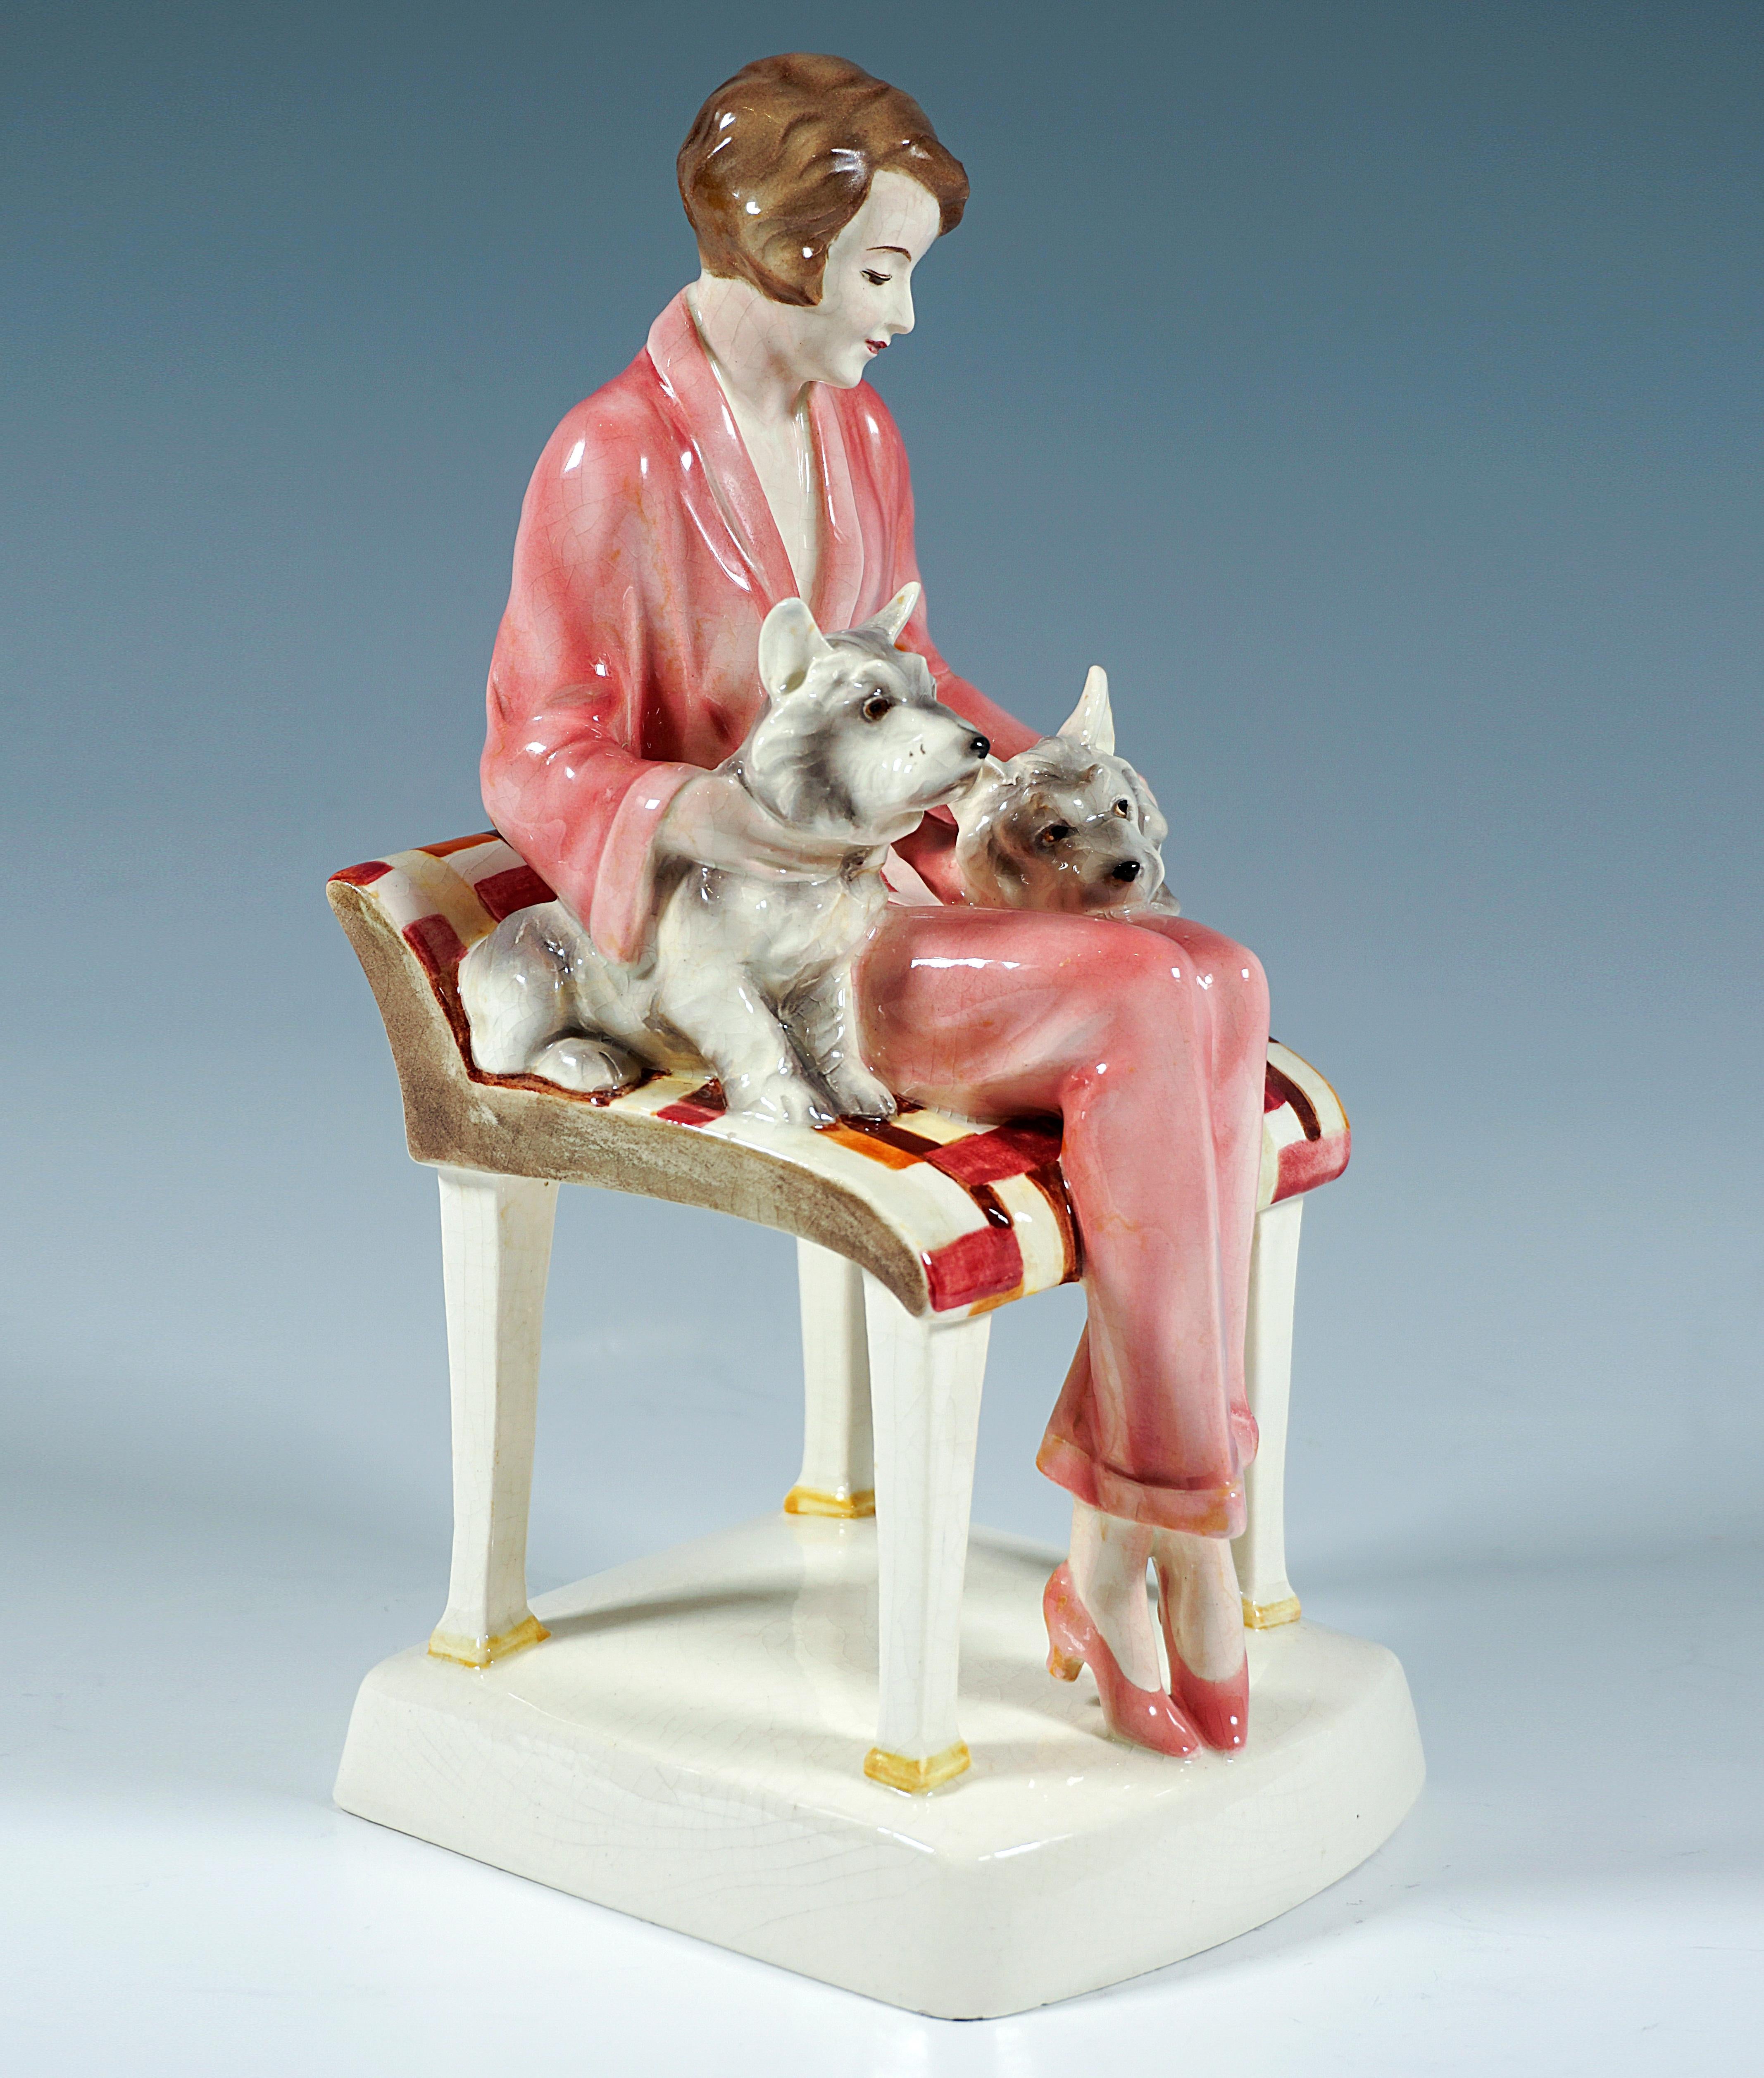 Excellent Goldscheider Figure Group of the 1930s:
Young lady in rosé pantsuit with brunette short haircut sitting on a large stool with low back support, embracing with both hands two terrier dogs that nestle on her left and right leg and lovingly